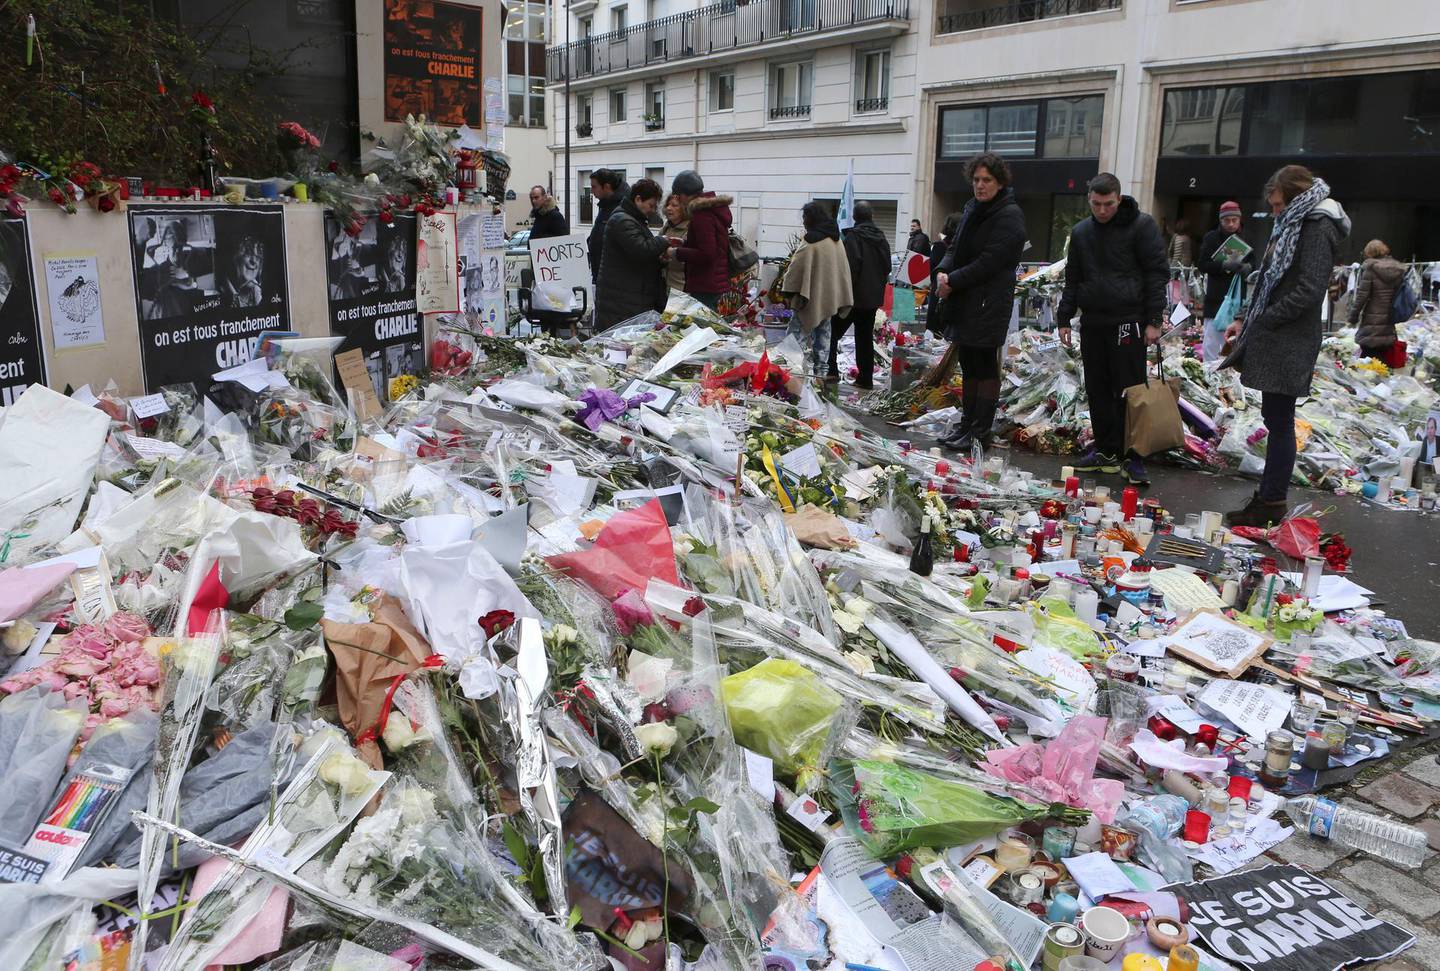 FILE - In this Jan. 14, 2015 file photo, flowers lay outside Charlie Hebdo headquarters in Paris. The January 2015 attacks against Charlie Hebdo and, two days later, a kosher supermarket, touched off a wave of killings claimed by the Islamic State group across Europe. Seventeen people died along with the three attackers. Thirteen men and a woman accused of providing the attackers with weapons and logistics go on trial on terrorism charges Wednesday Sept. 2, 2020. (AP Photo/Jacques Brinon, File)